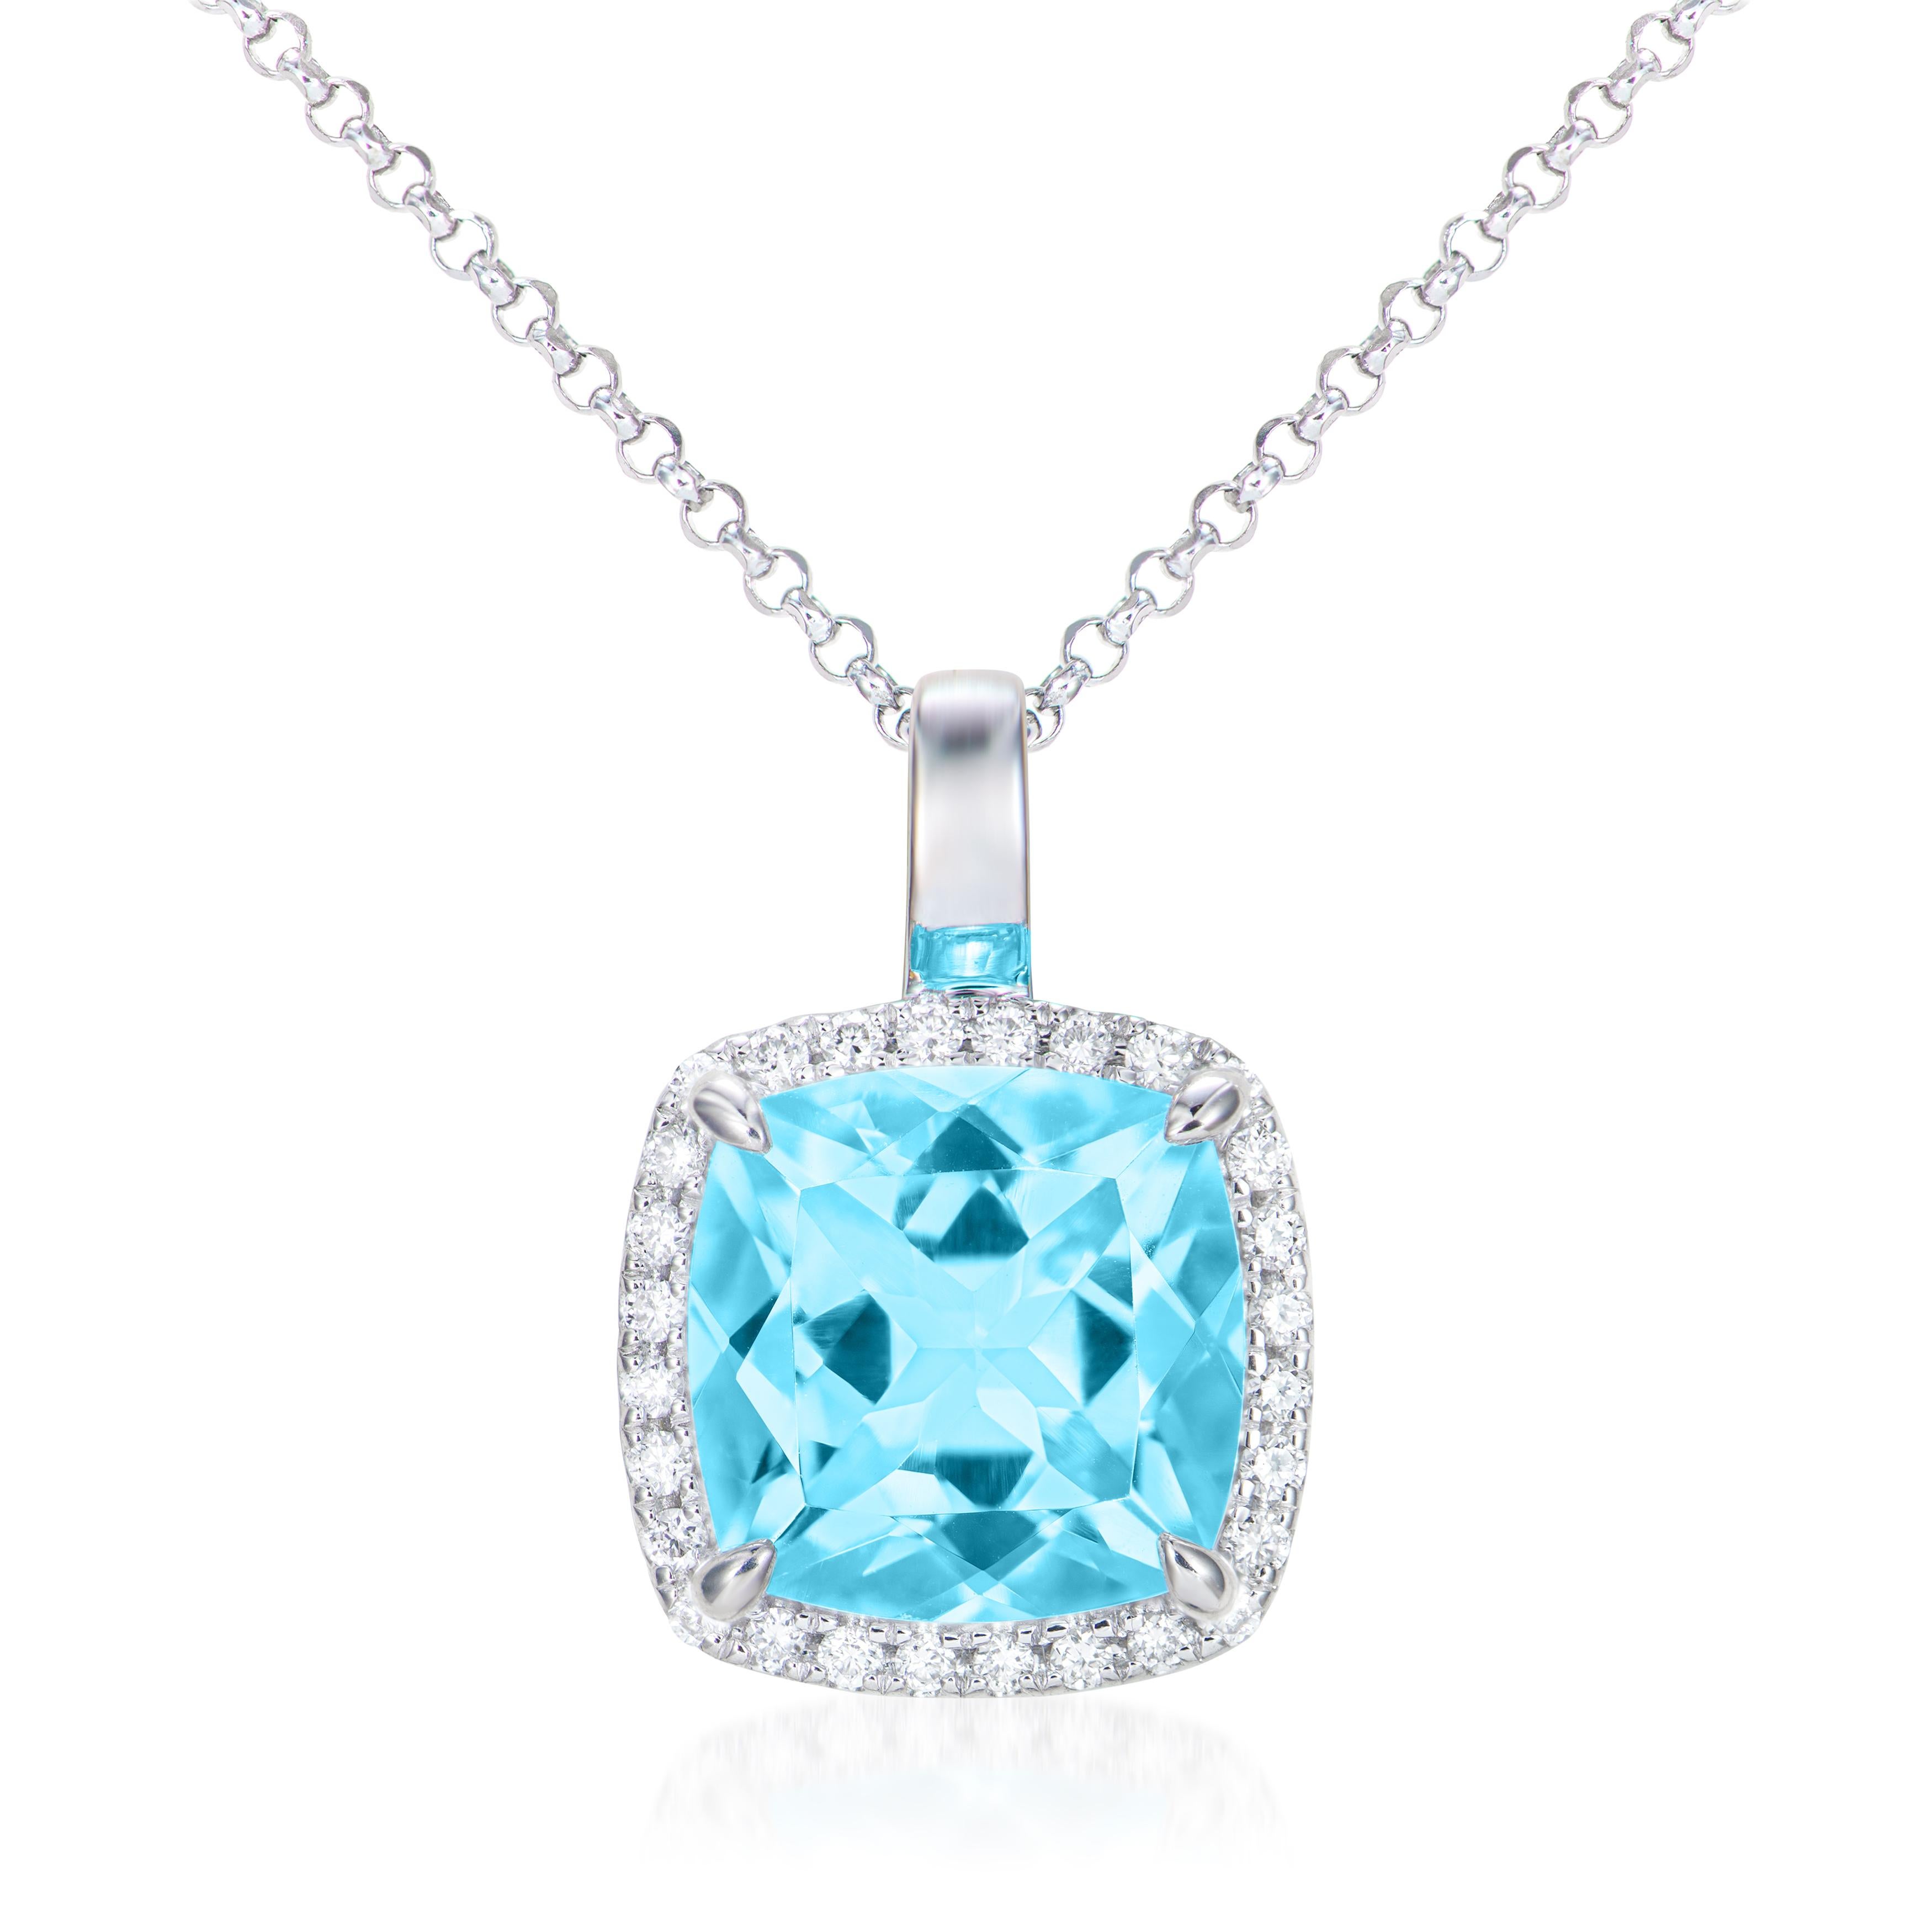 Contemporary 2.57 Carat Swiss Blue Topaz Pendant in 18Karat White Gold with White Diamond. For Sale